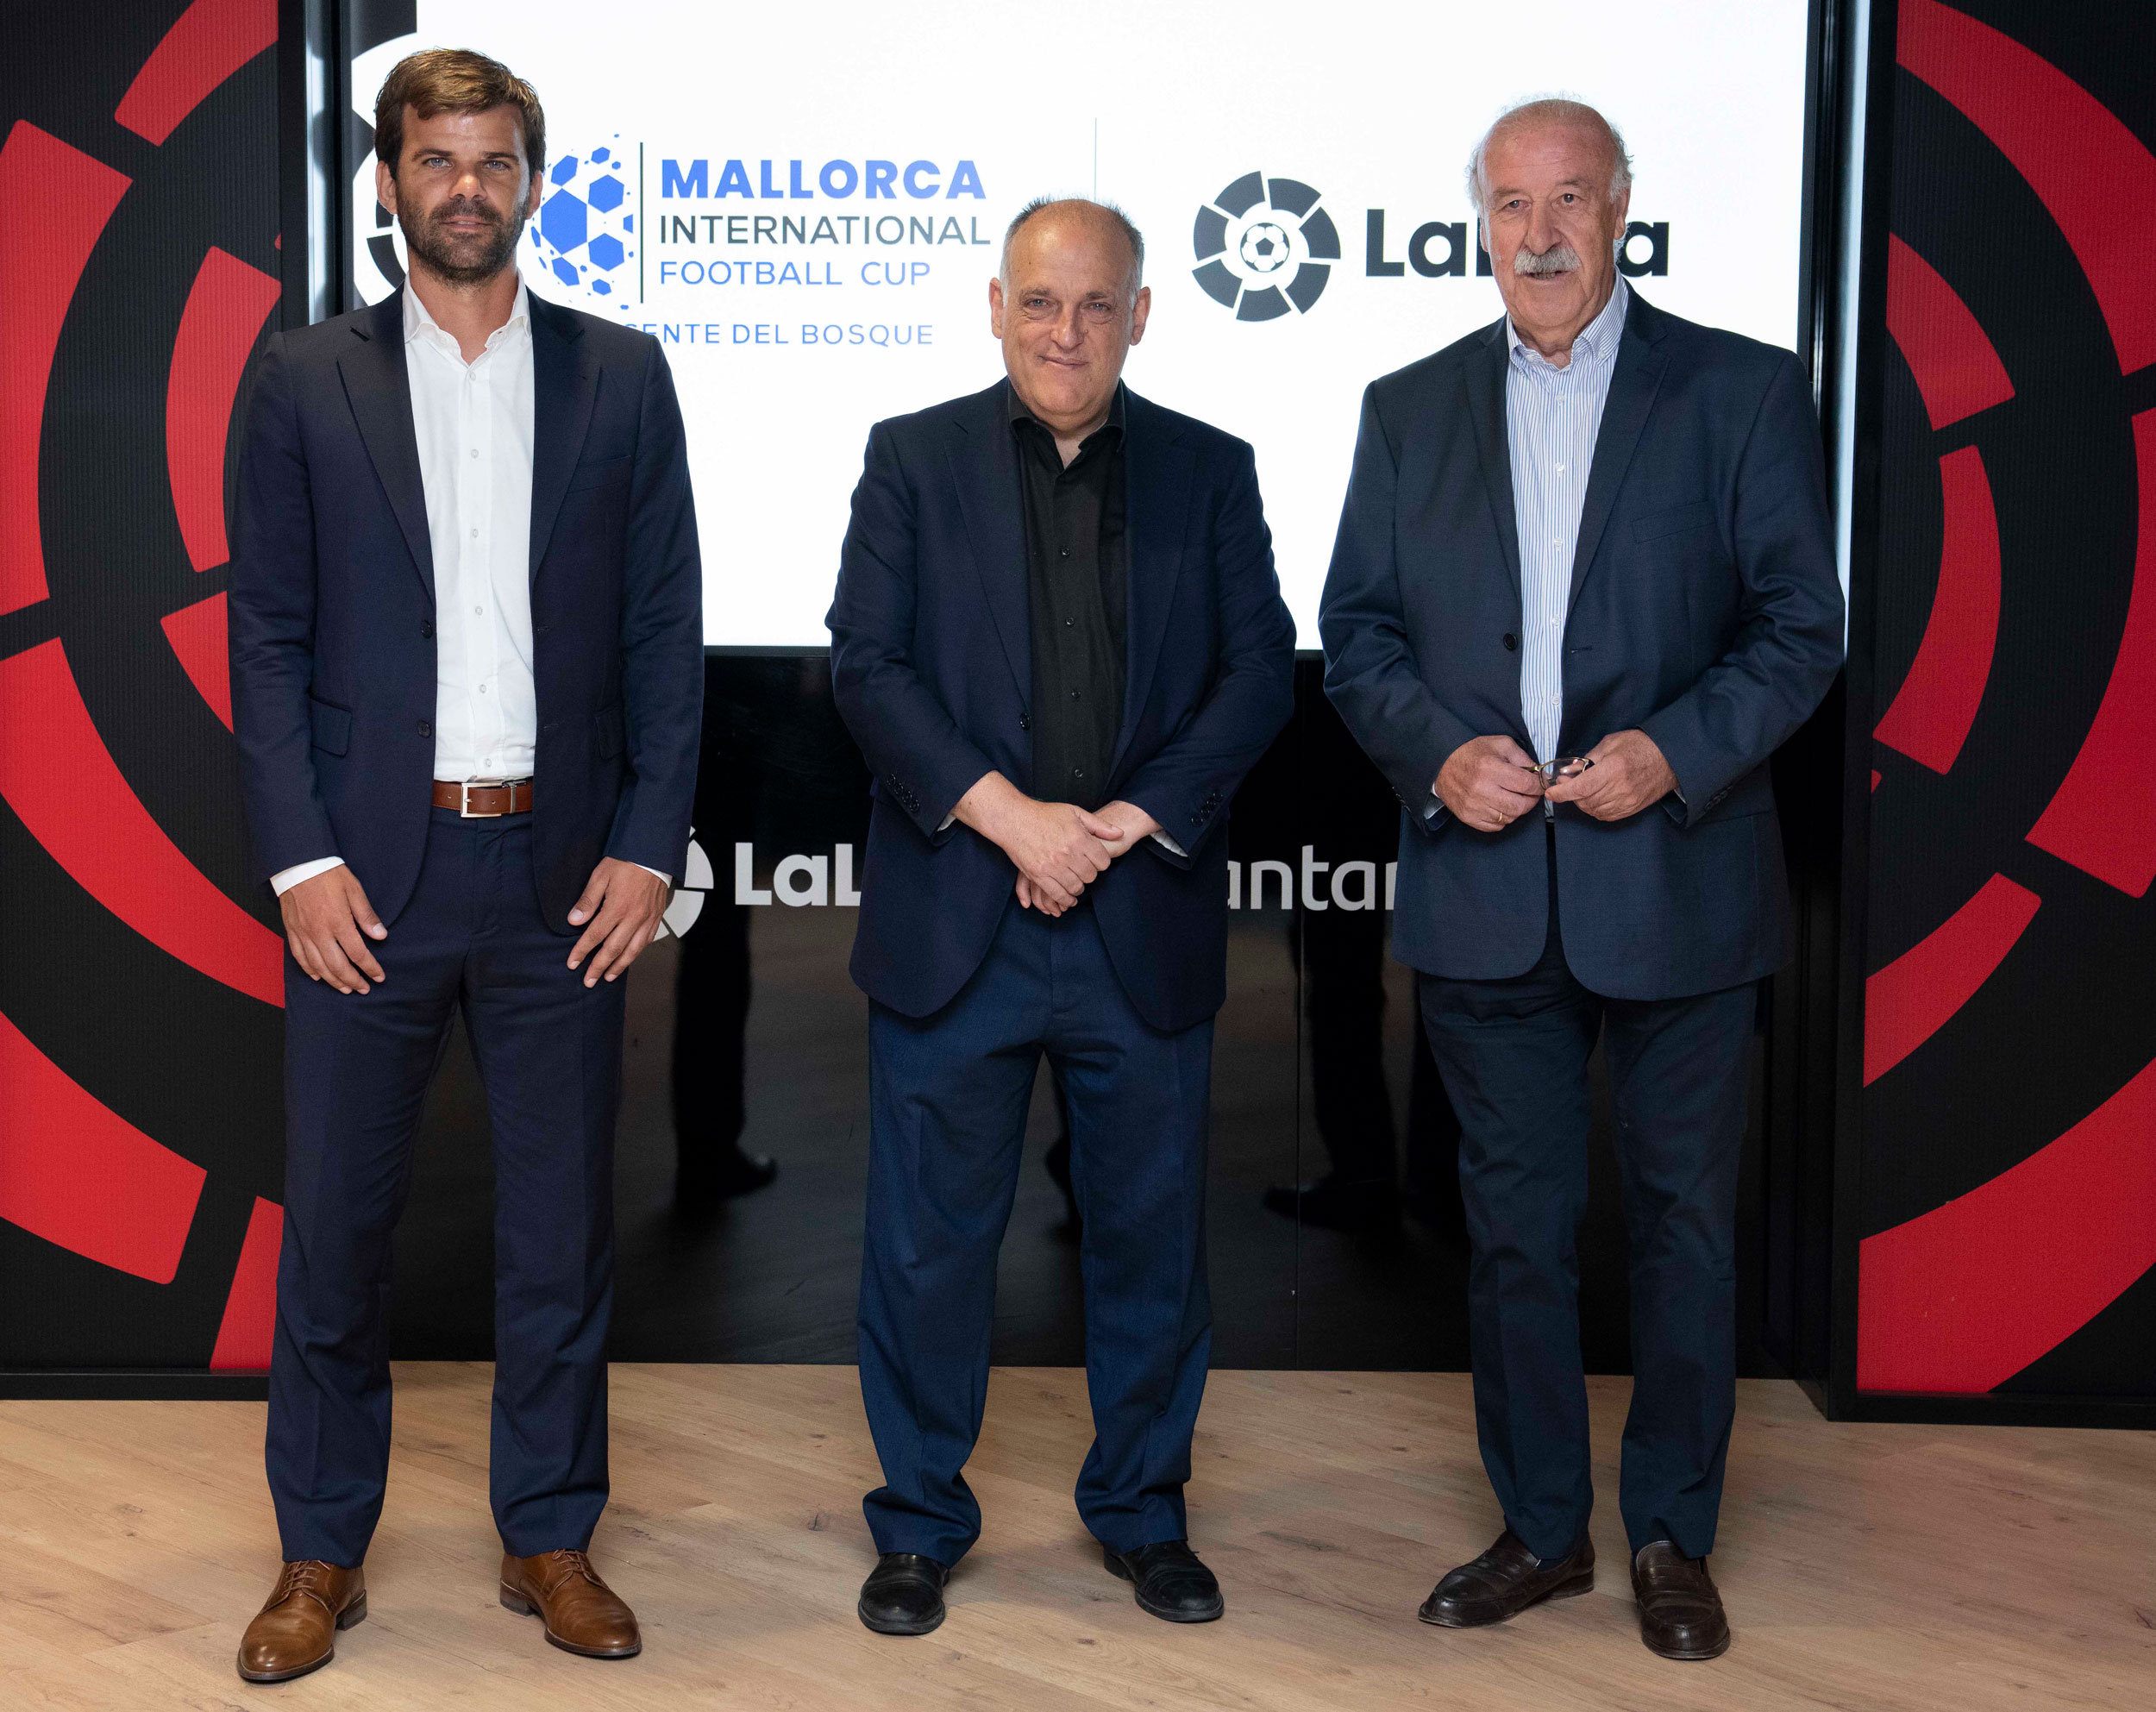 LaLiga and Vicente del Bosque Football Academy sign an agreement to promote the “Mallorca International Football Cup”.